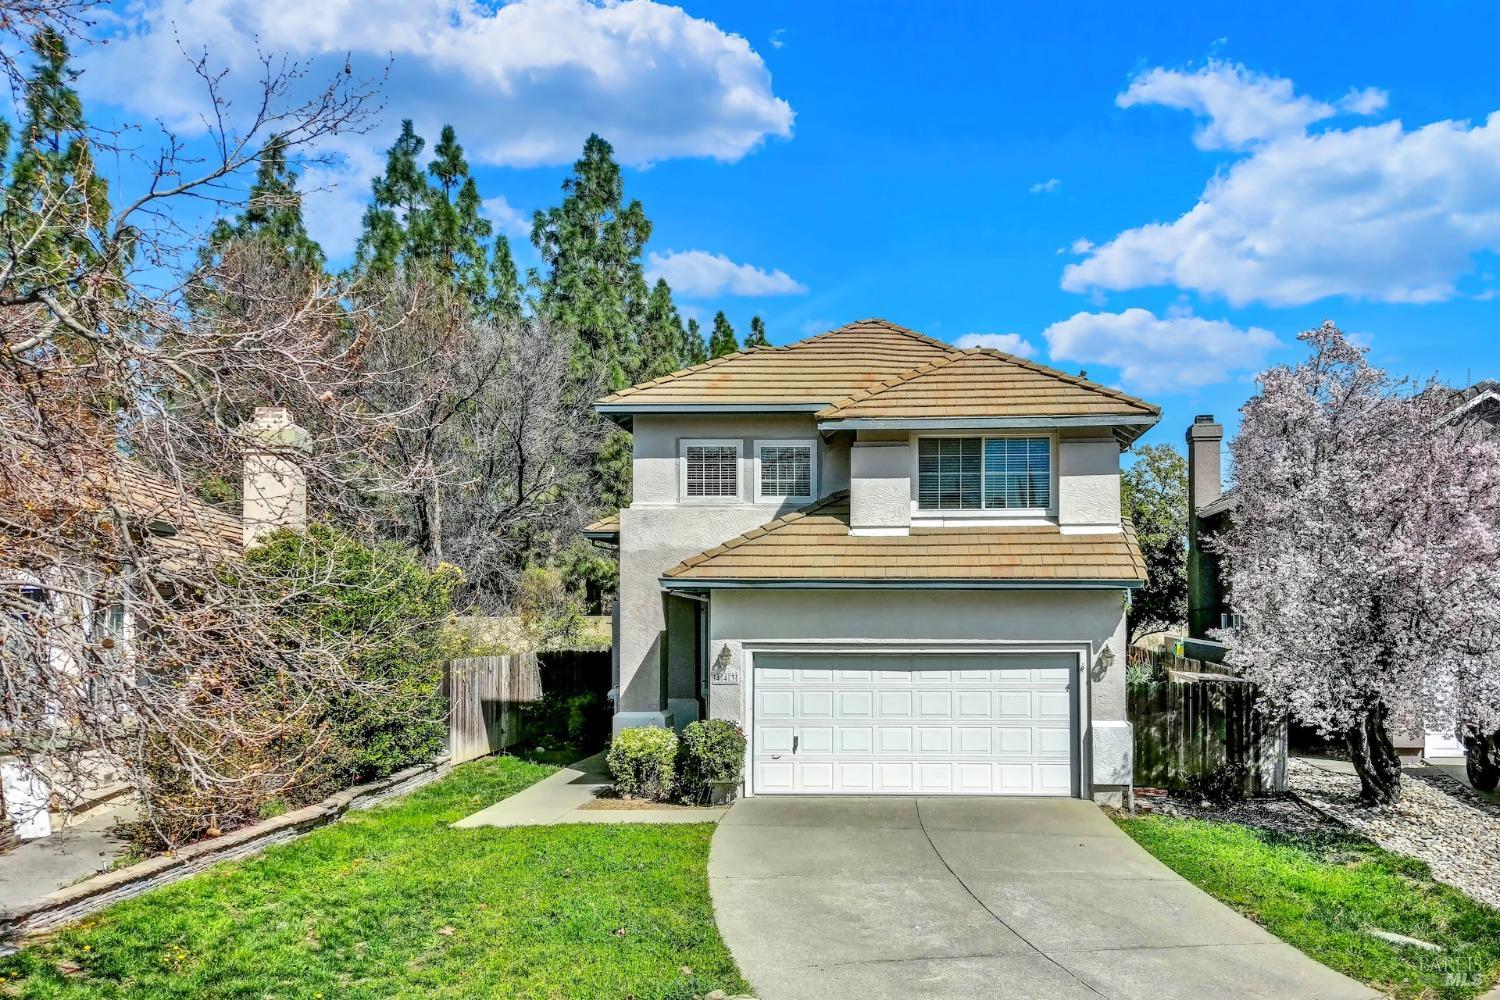 Photo of 443 Bald Eagle Dr in Vacaville, CA